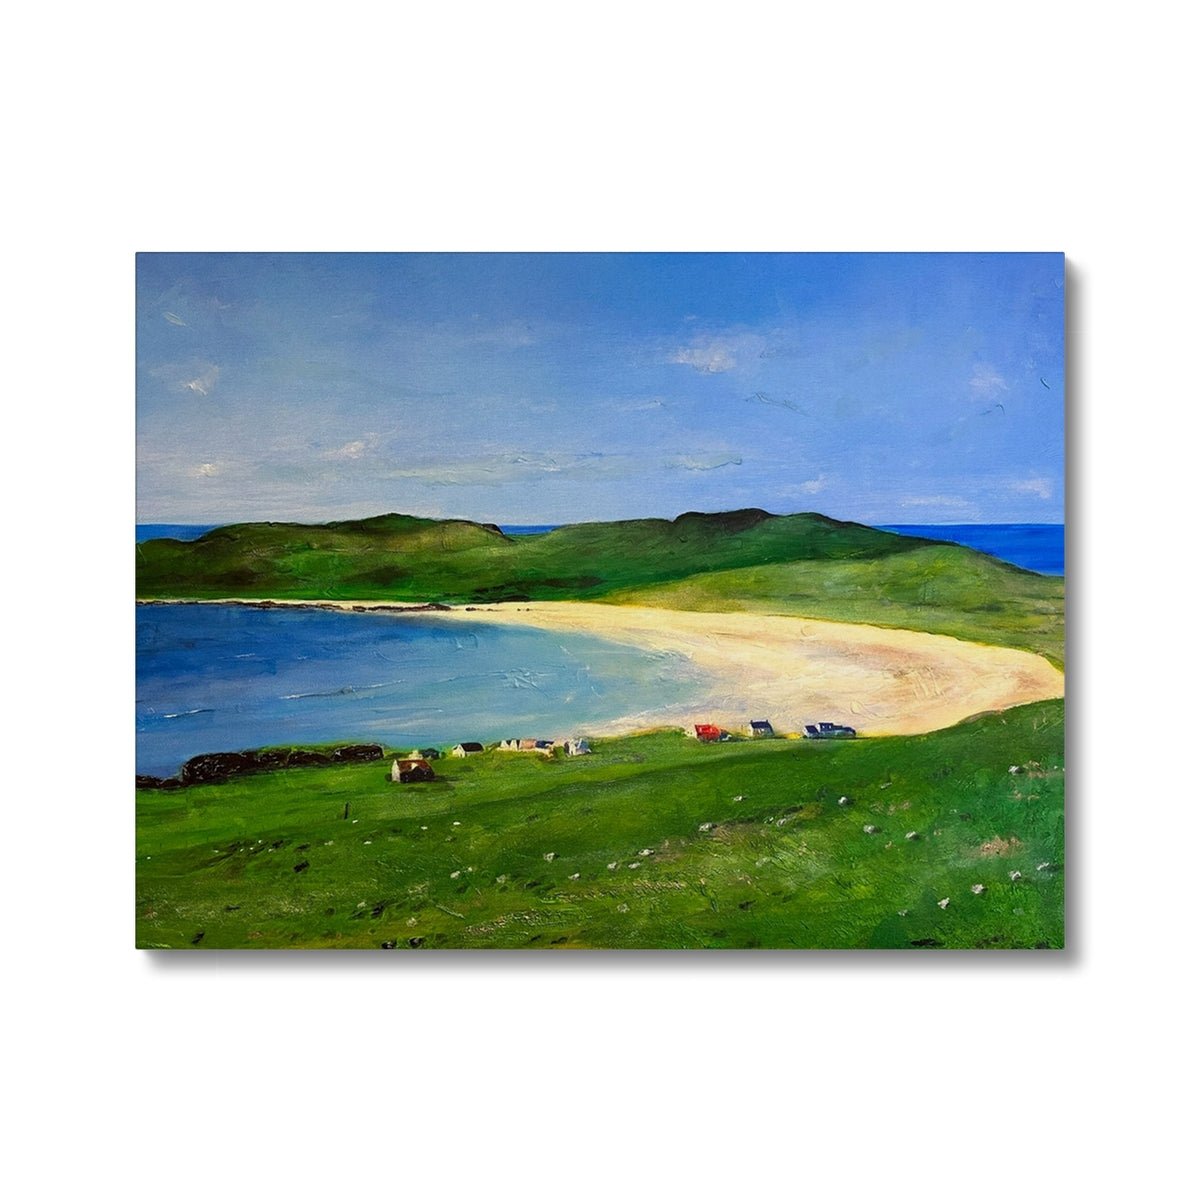 Balephuil Beach Tiree Painting | Canvas From Scotland-Contemporary Stretched Canvas Prints-Hebridean Islands Art Gallery-24"x18"-Paintings, Prints, Homeware, Art Gifts From Scotland By Scottish Artist Kevin Hunter